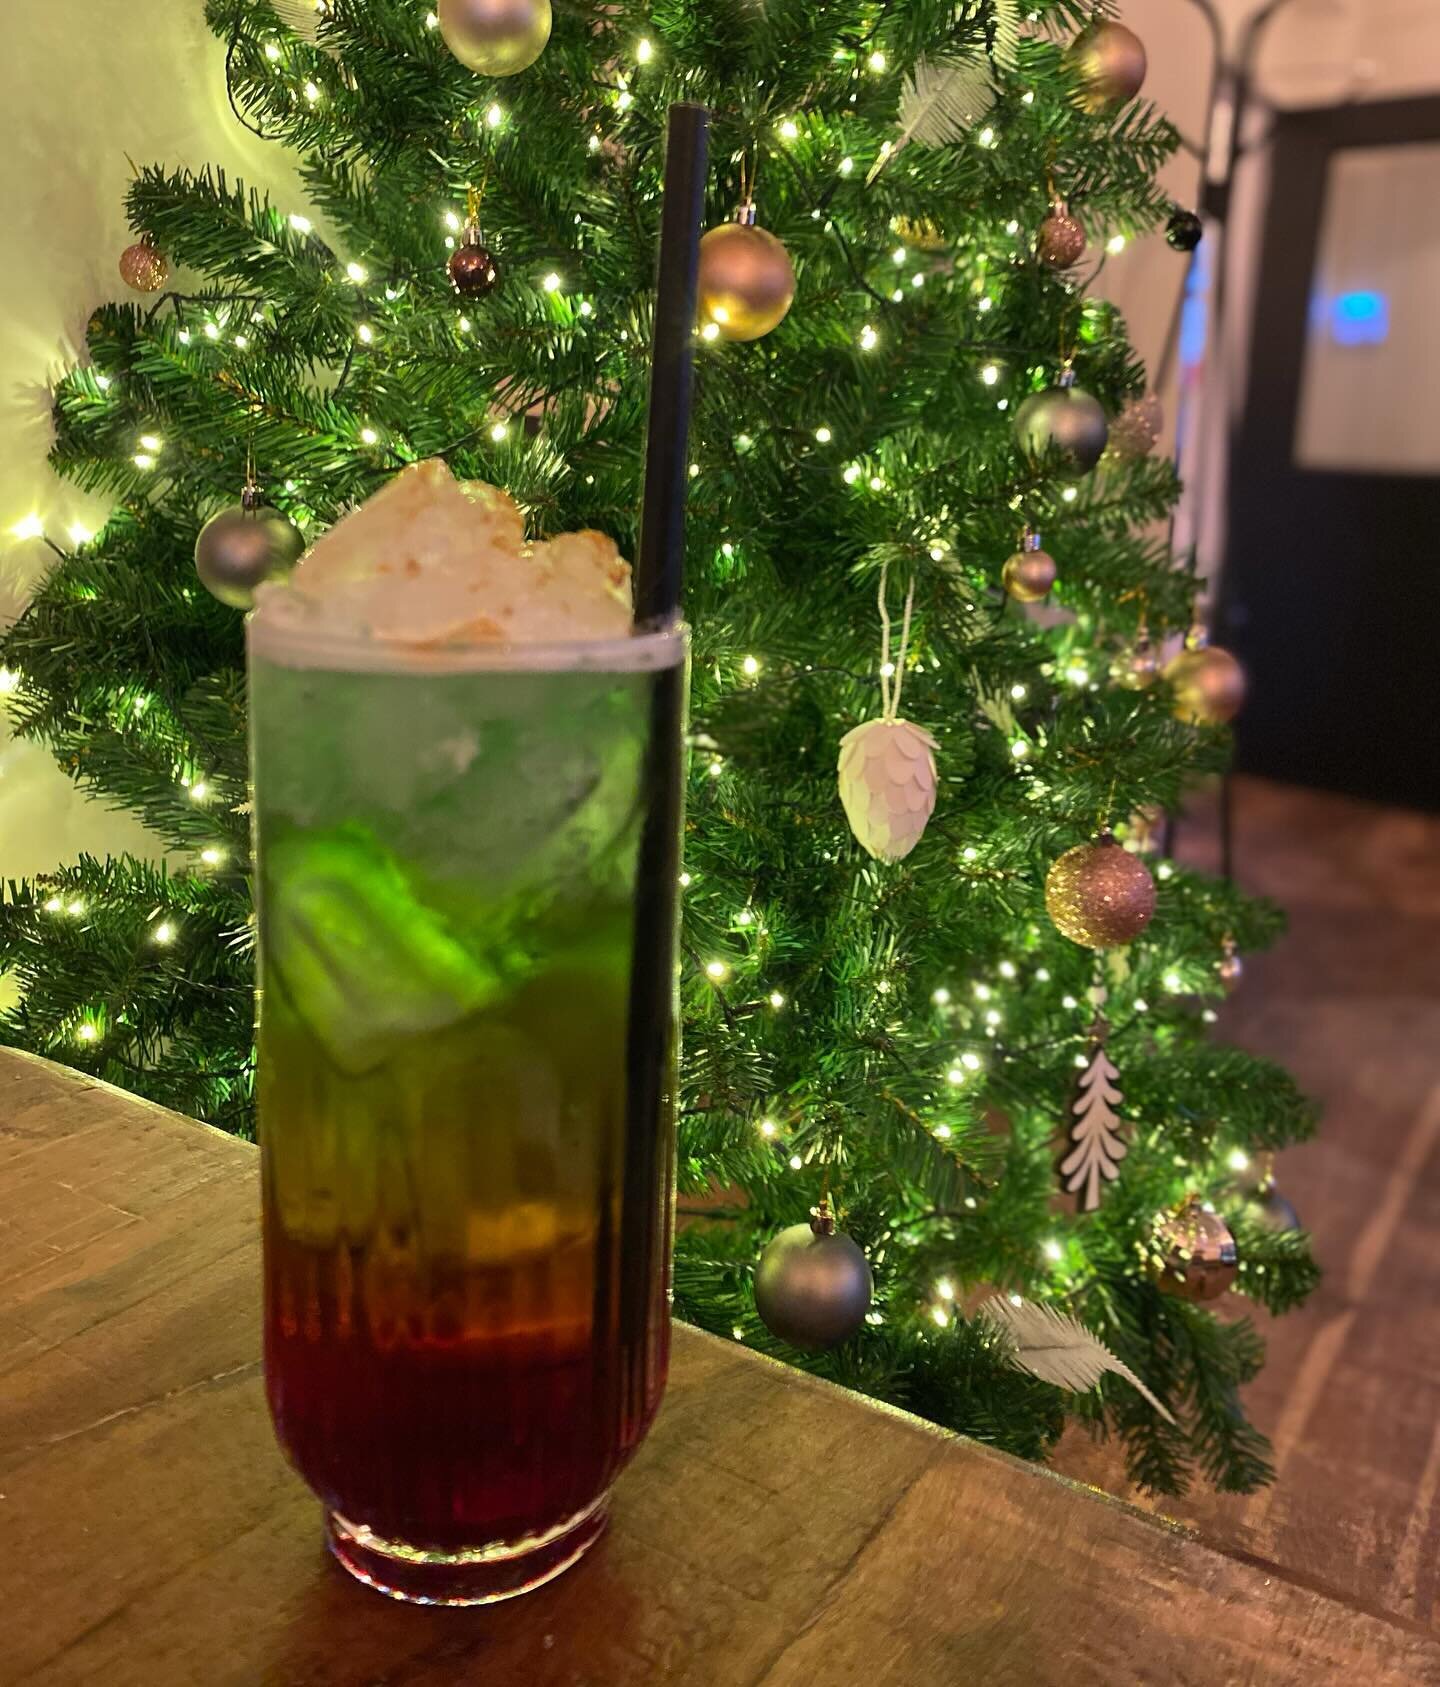 Christmas is almost here! Ask your server about our festive cocktails for some seasonal sipping🍹🎄

(here&rsquo;s a sneaky peak of Candy Cane Lane😋)